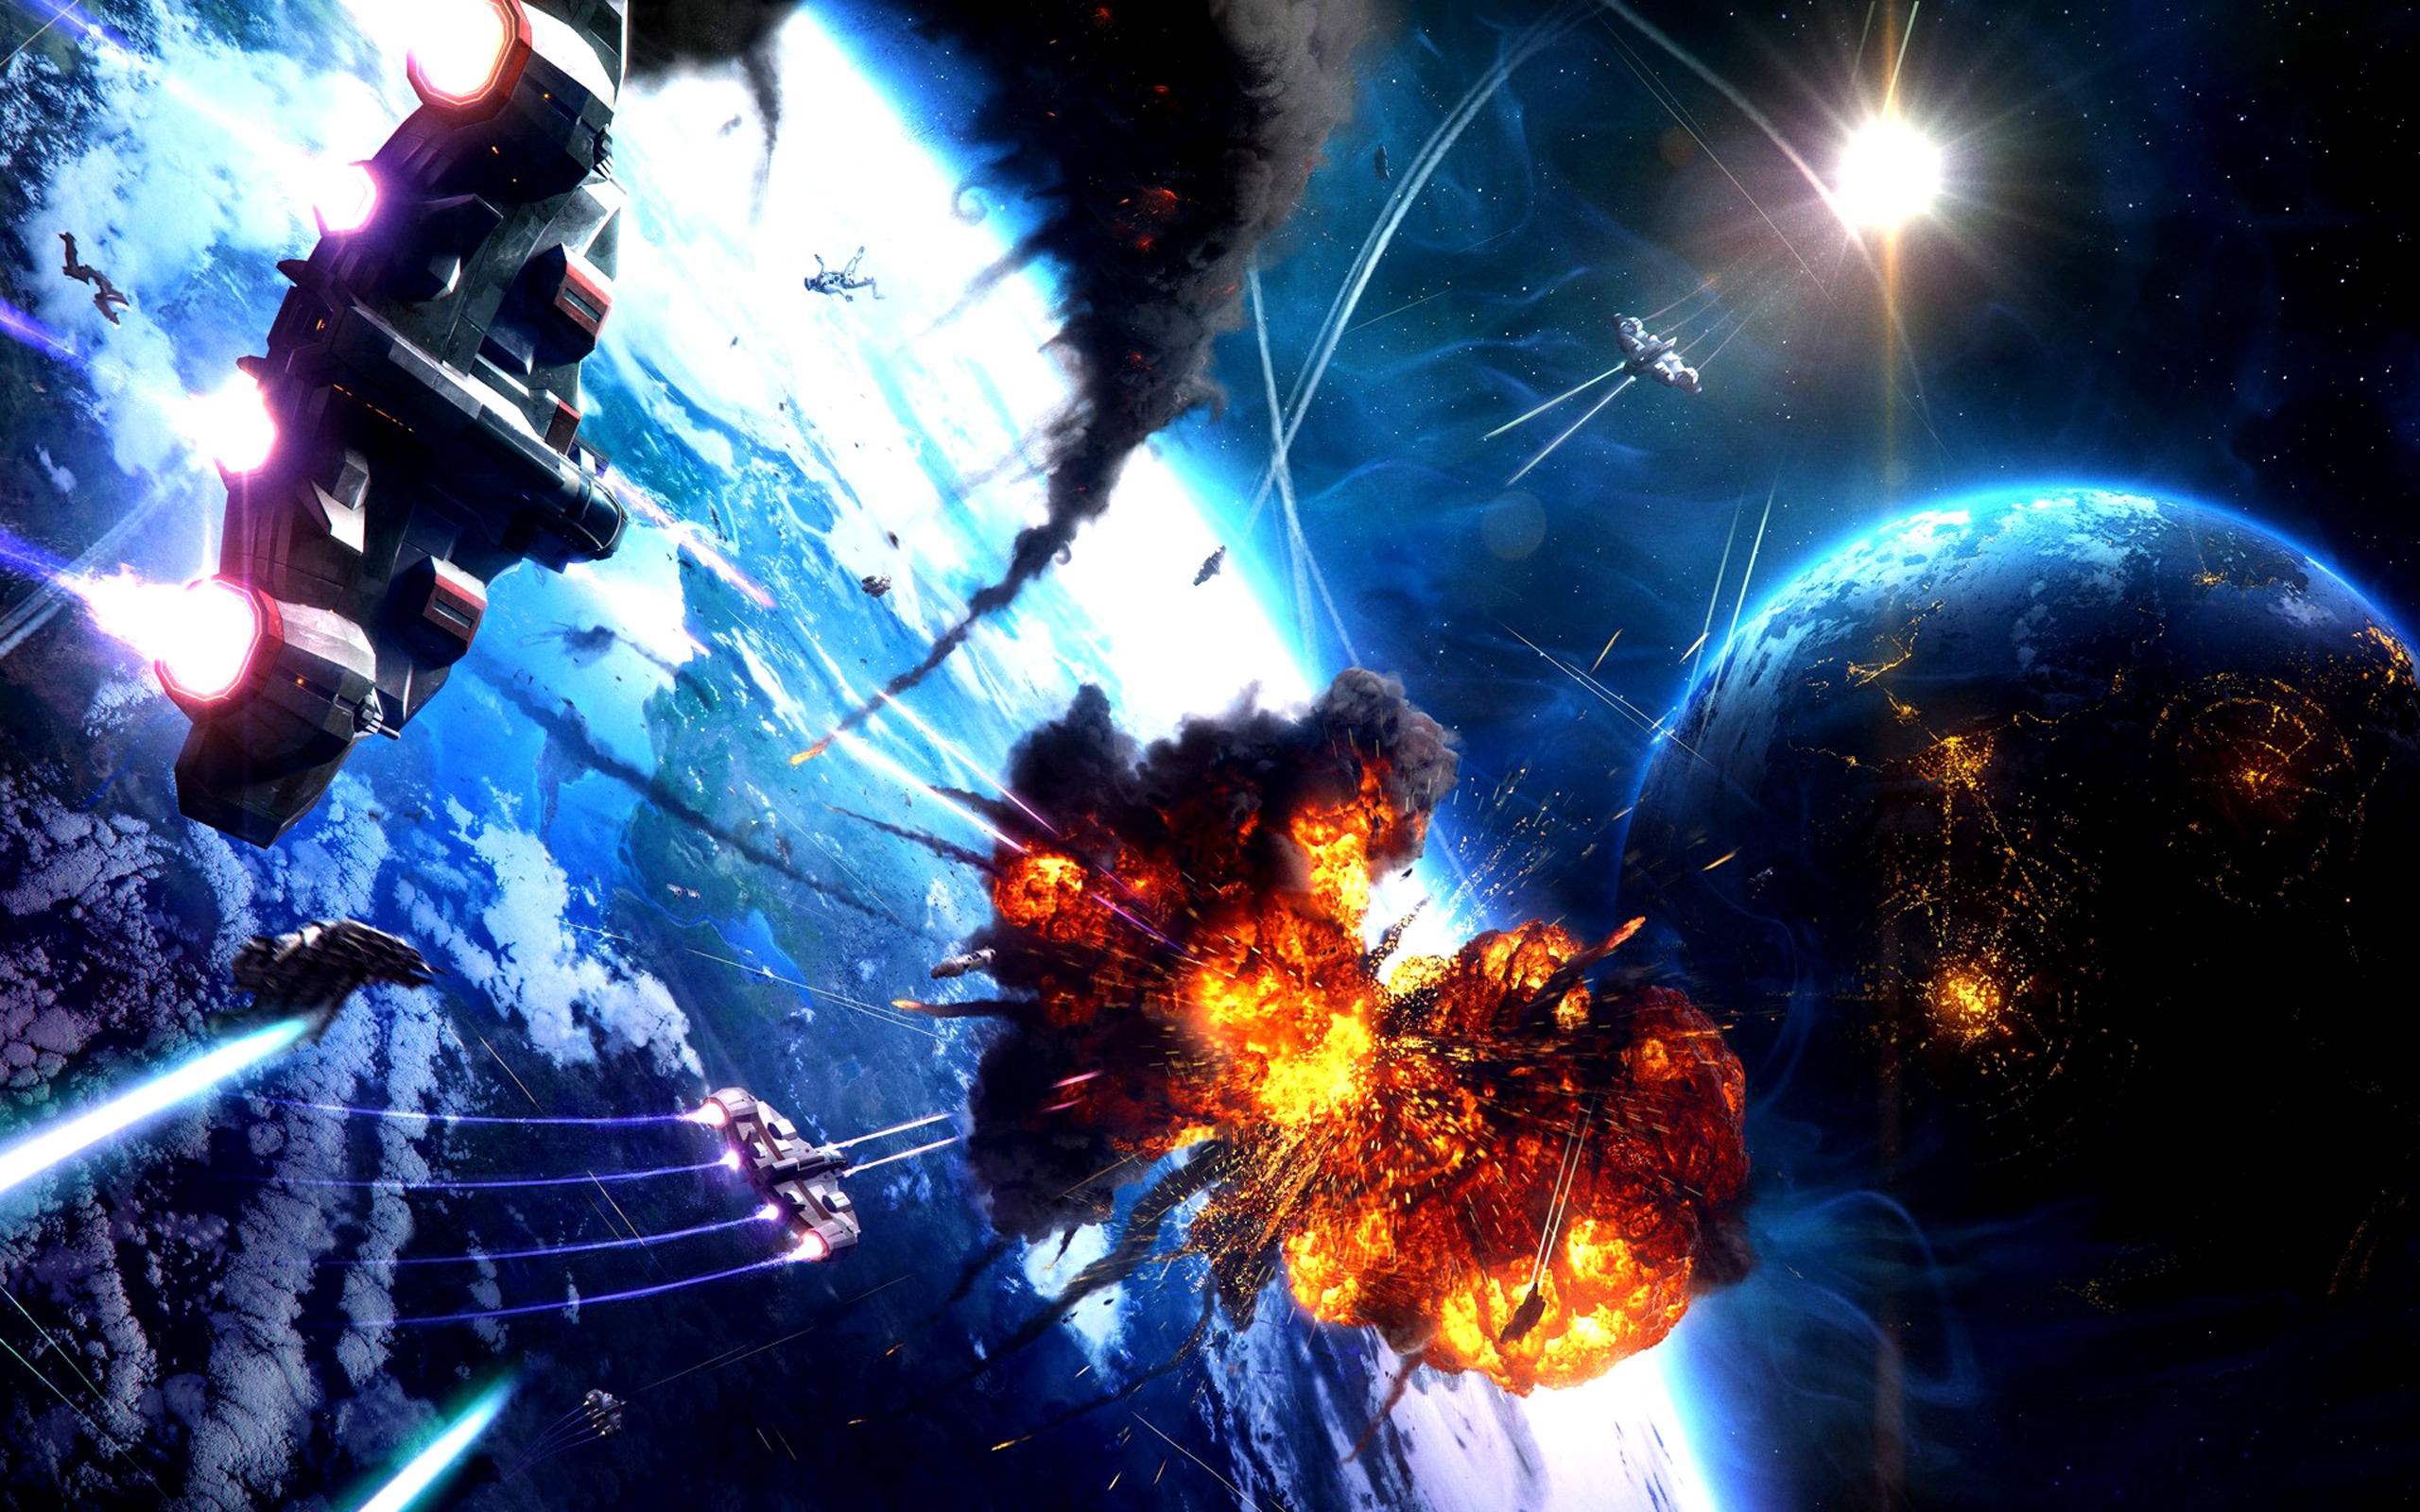 light, Outer, Space, Futuristic, Explosions, Planets, Spaceships, Digital, Art, Vehicles Wallpaper